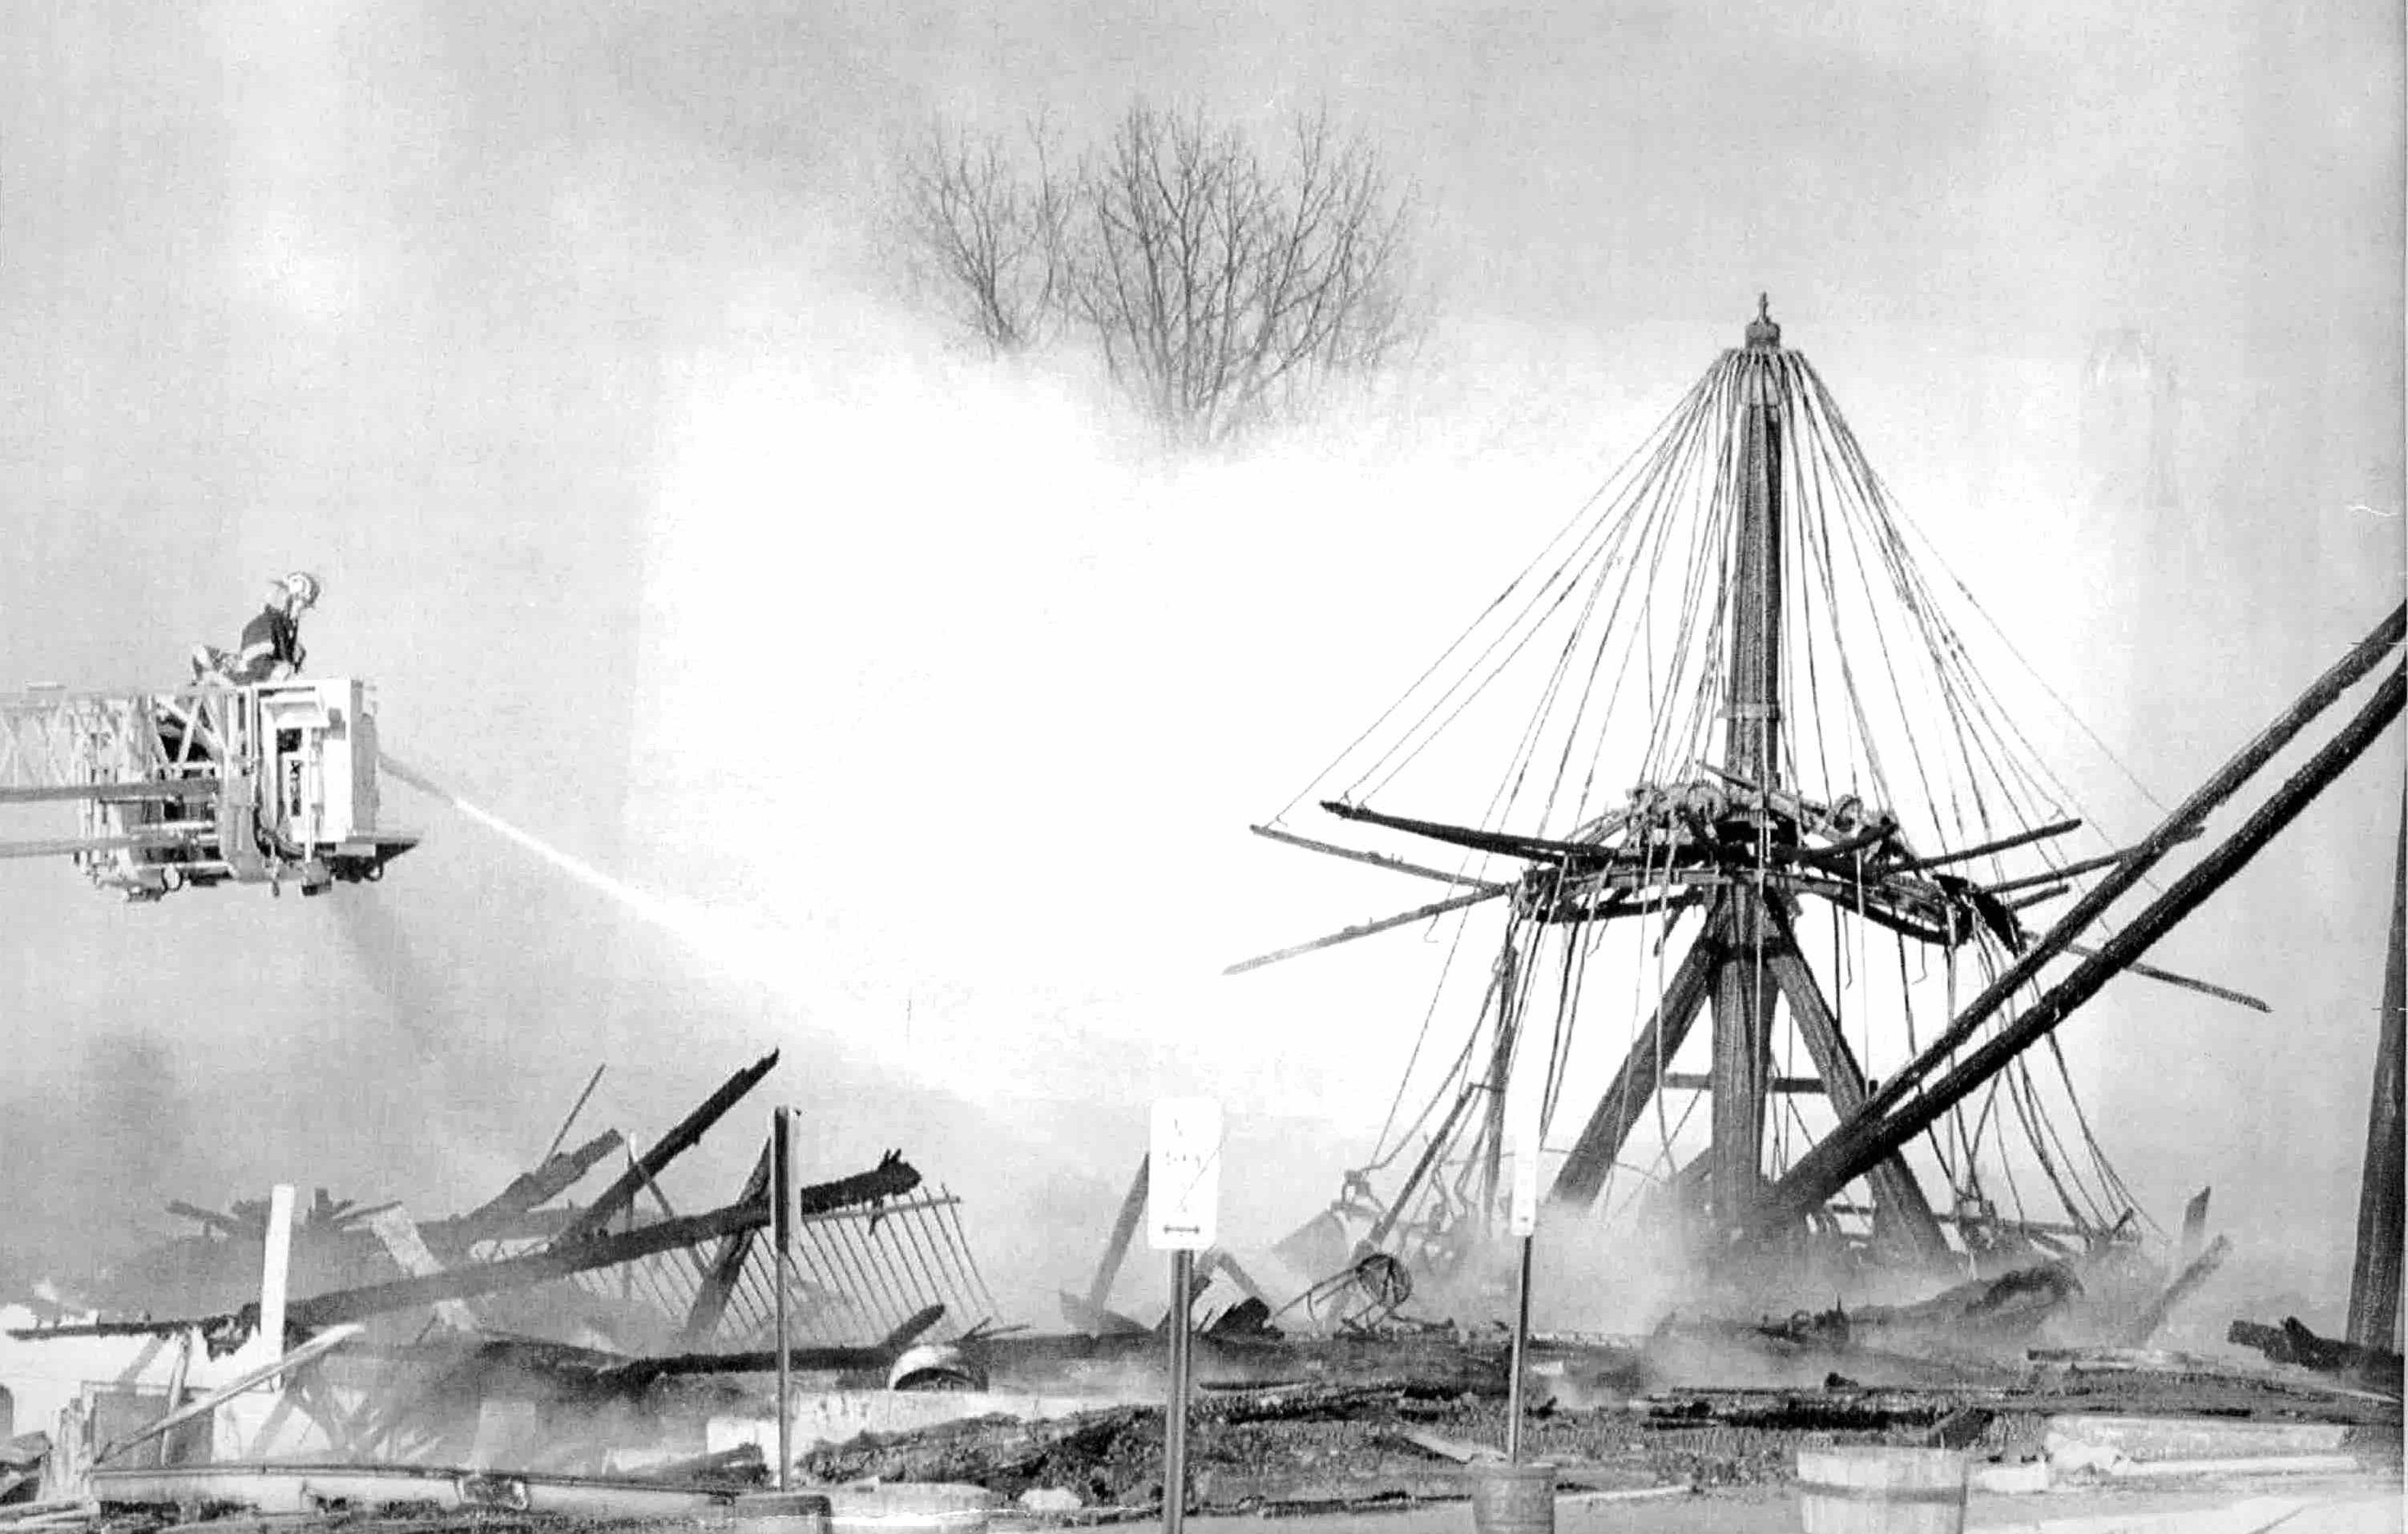 Firefighters pump water onto the skeletal remains of the Seabreeze Carousel following a March 31, 1991 blaze at the amusement park. The 79-year-old merry-go-round was the 36th of 85 carousels made by the Philadelphia Tobaggan Co. and was brought to Seabreeze in 1926.